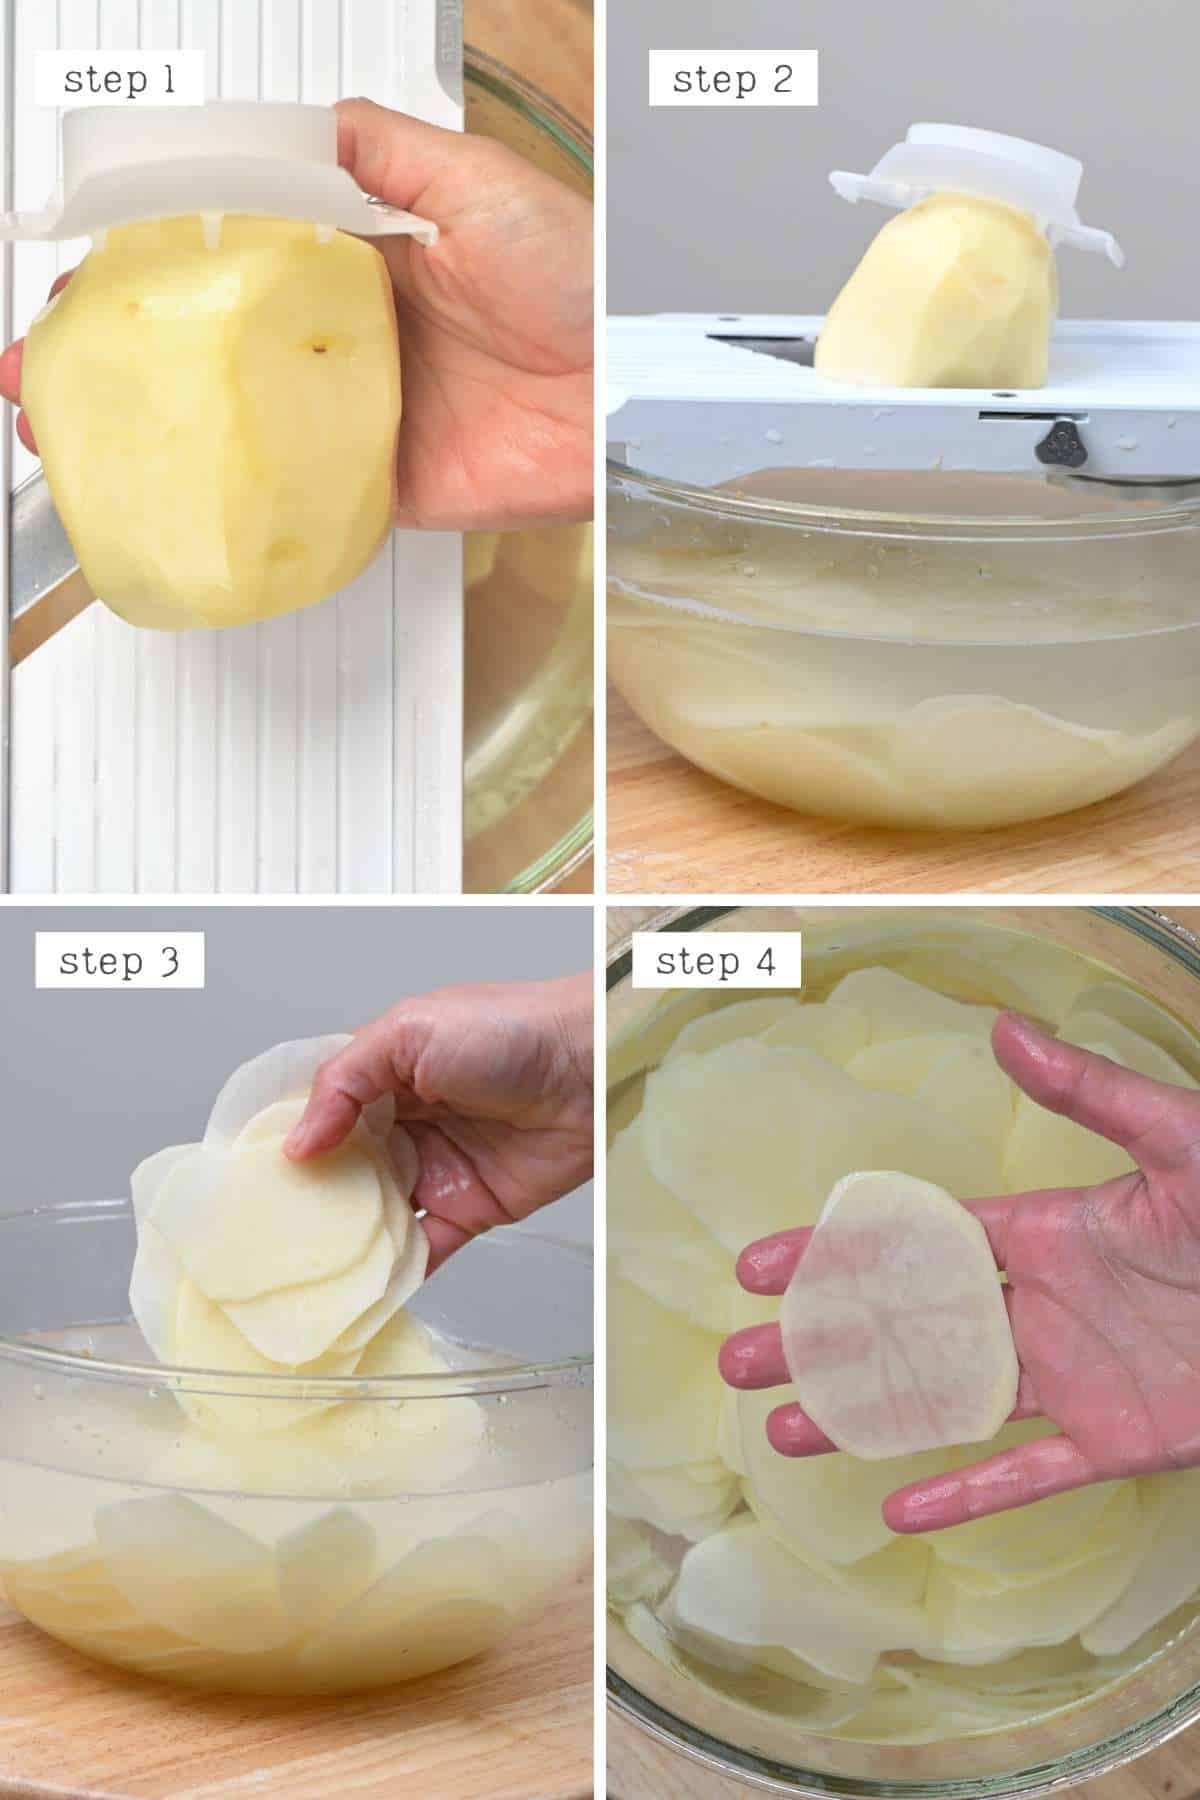 Steps for slicing potatoes